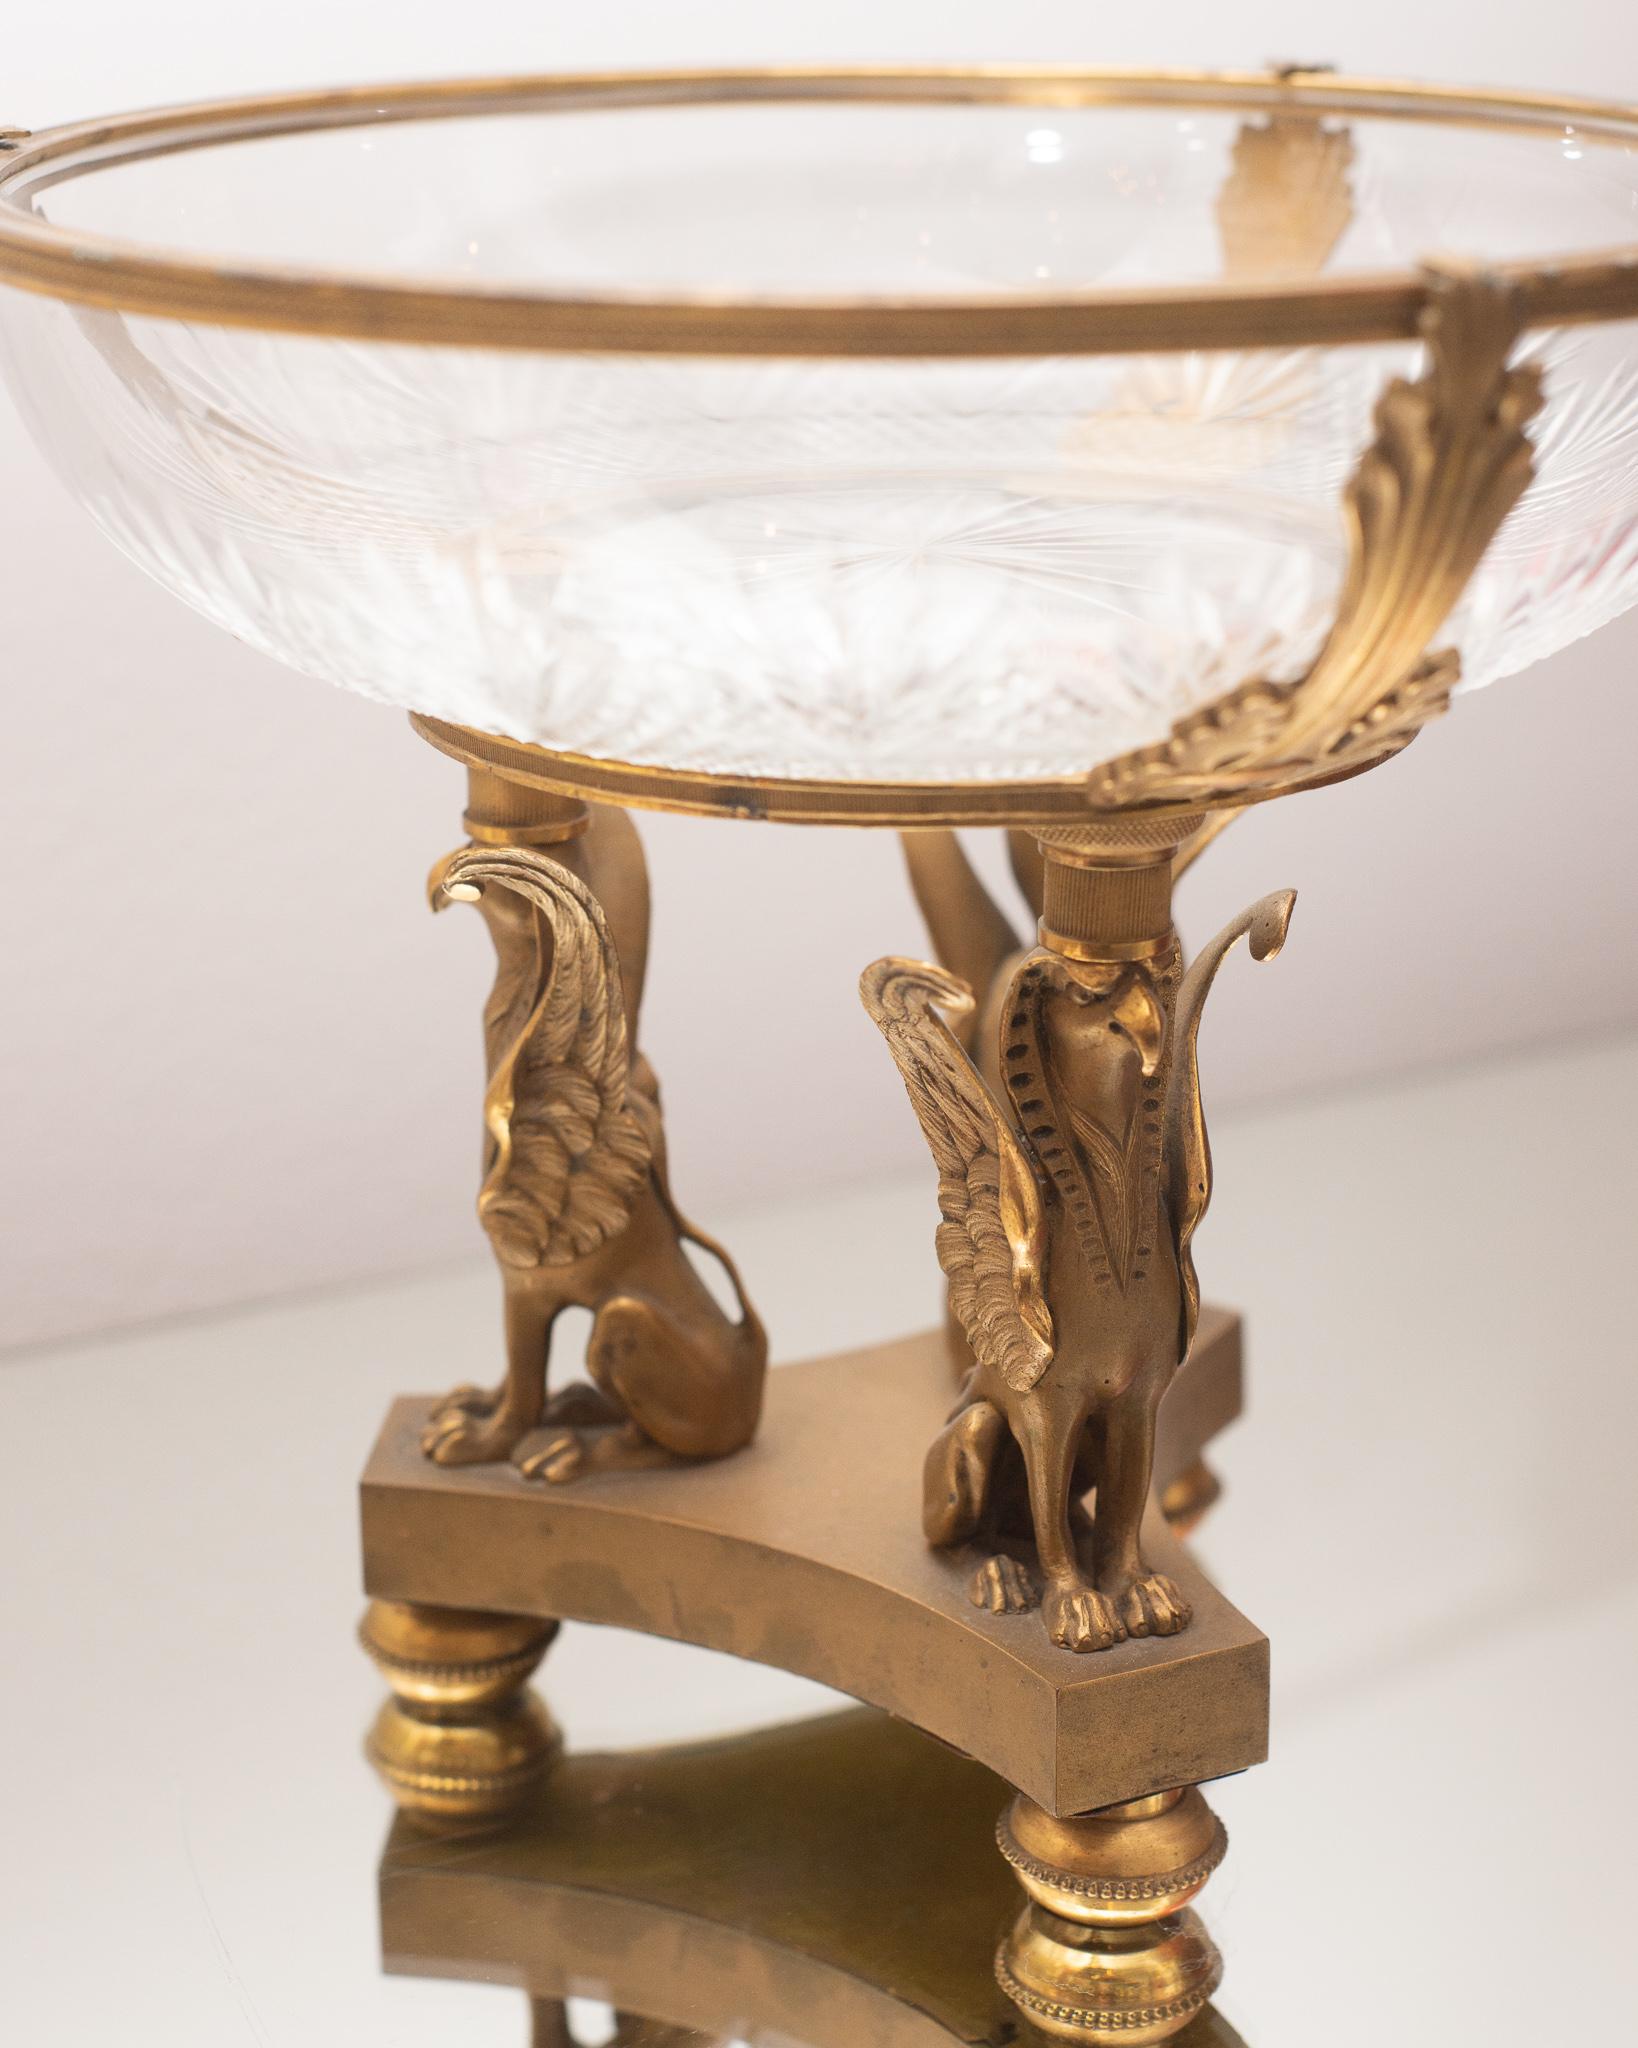 An Antique Baccarat cut crystal bowl, held up with 3 griffin mounts on a bronze pedestal, circa 1900, this beautiful piece is unsigned; the quality of the workmanship speaks to the skill of the maker.